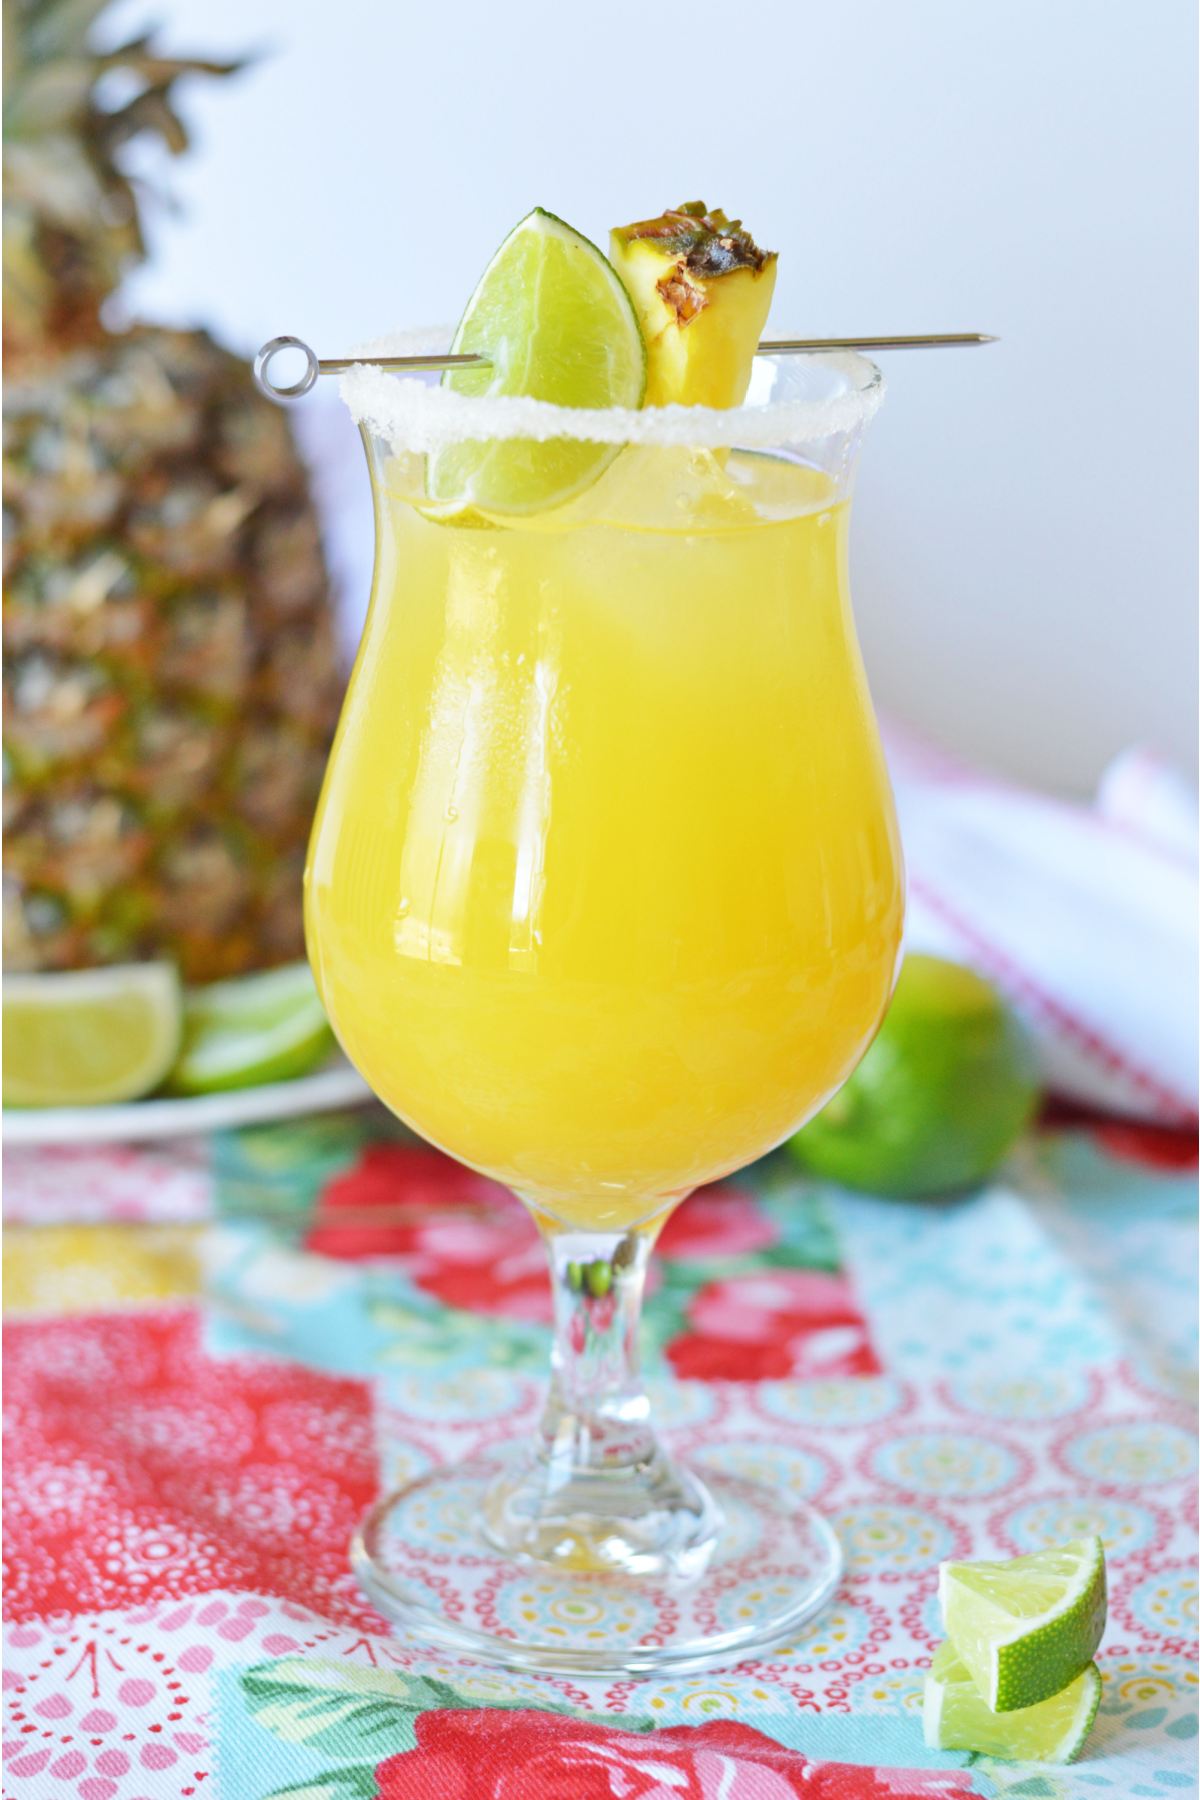 Pineapple margarita recipe with lime and pineapple